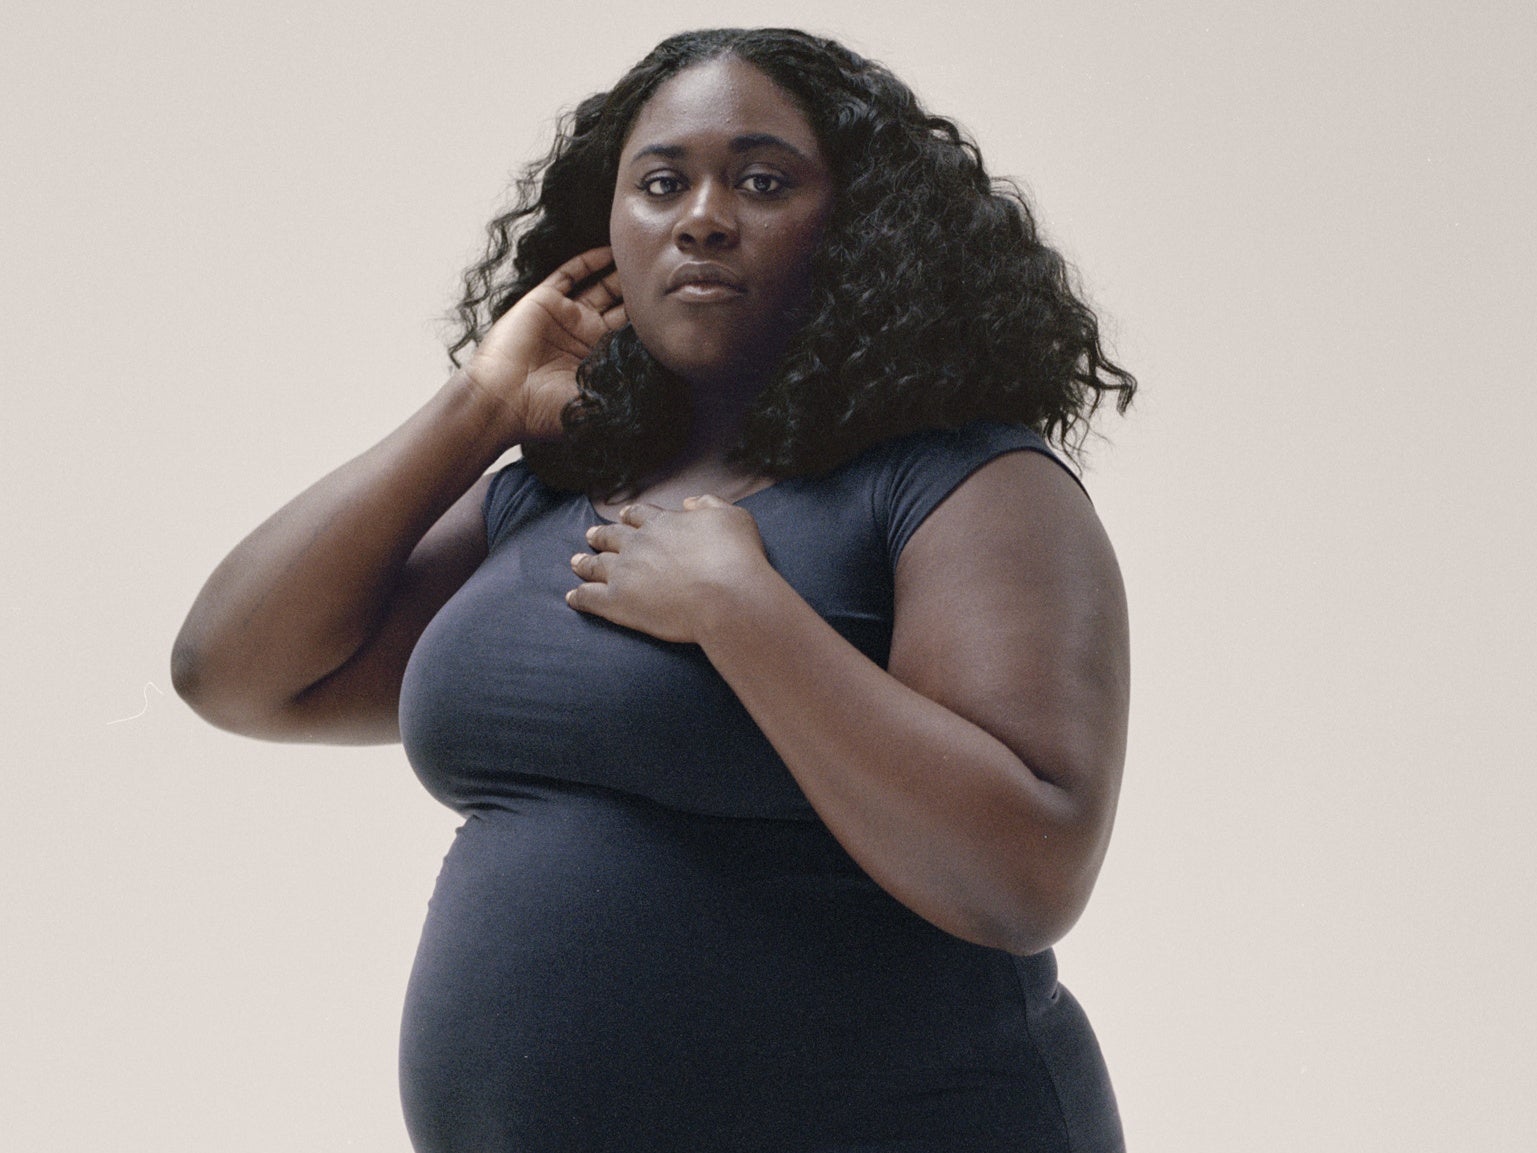 Universal Standard Launches Fit Liberty (Mom) With Help From Danielle Brooks